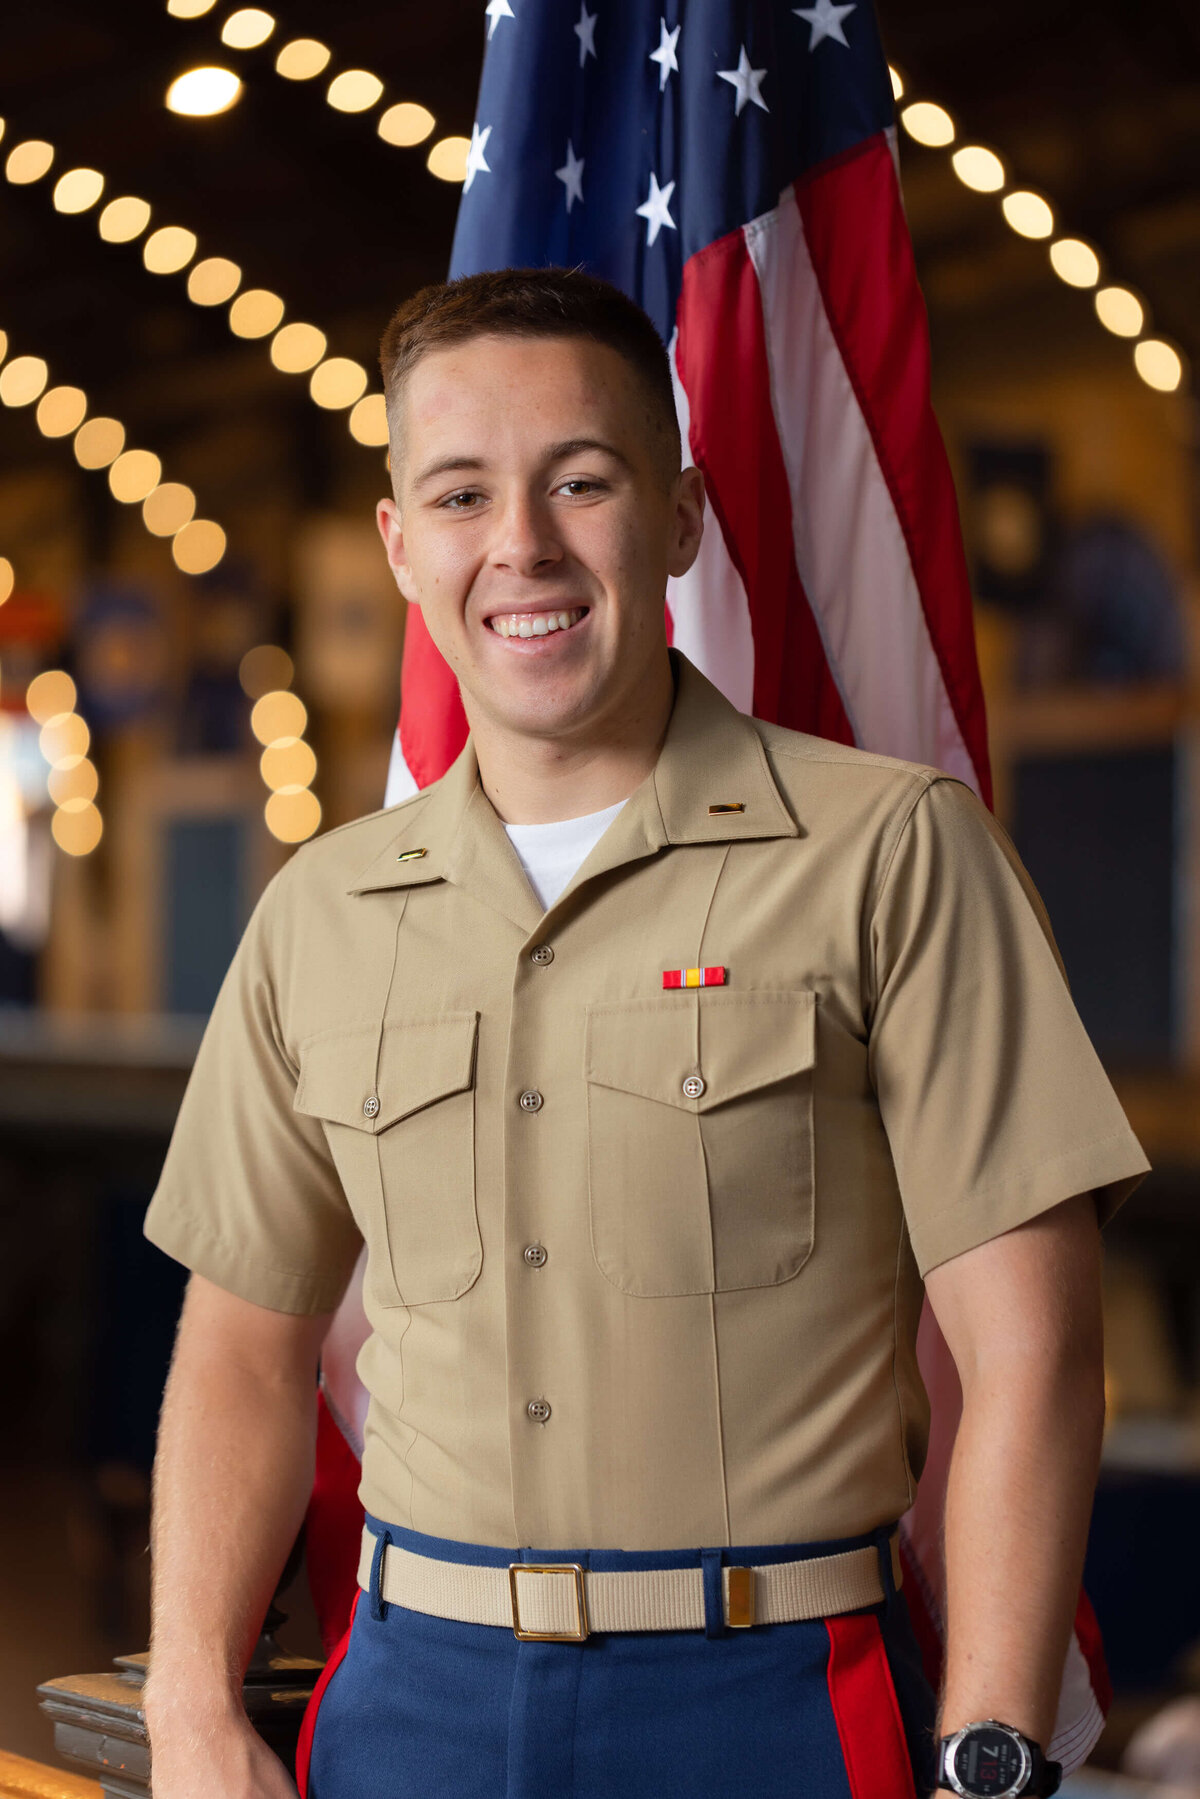 U.S. Marine Corps officer smiles with bokeh lights and flag in Naval Academy Dahlgren Hall.